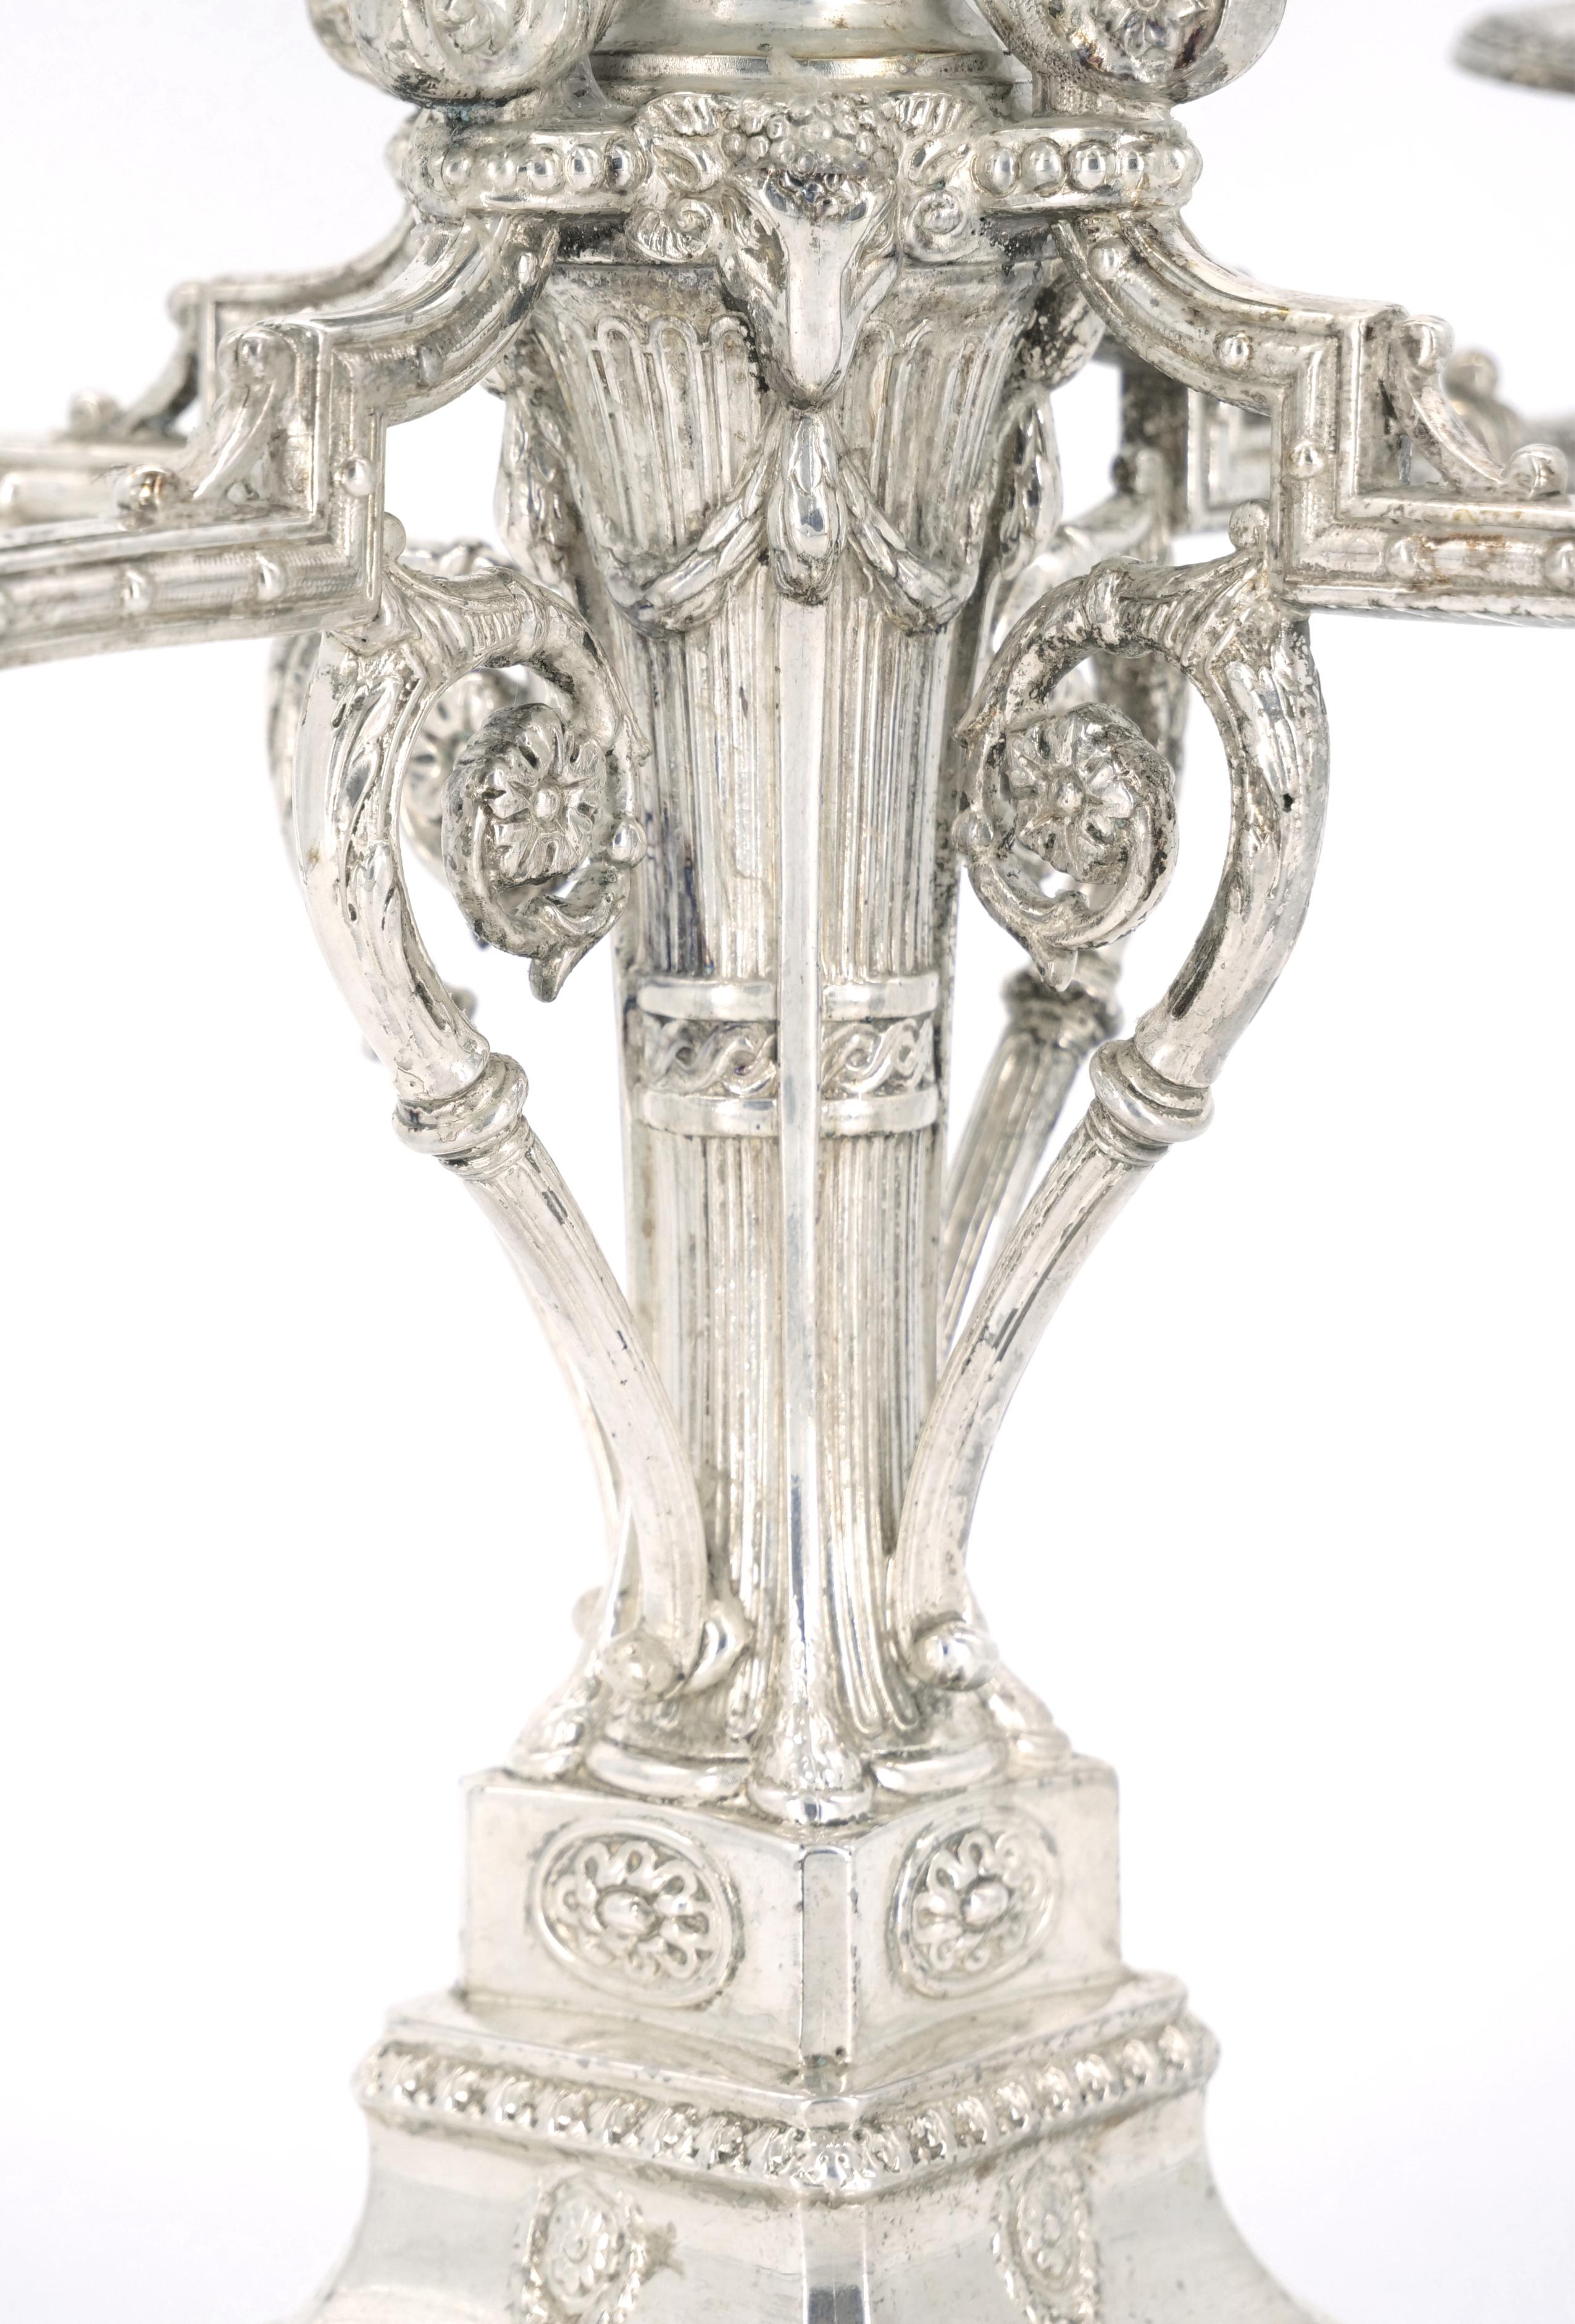 Exceptional pair of Victorian period Sheffield silverplate candelabra, circa 1860, with five candle arms with fine repousse and chased designs including bellflower swags, urns, foliate scrolls, rosettes and ram heads. Well-polished and ready for